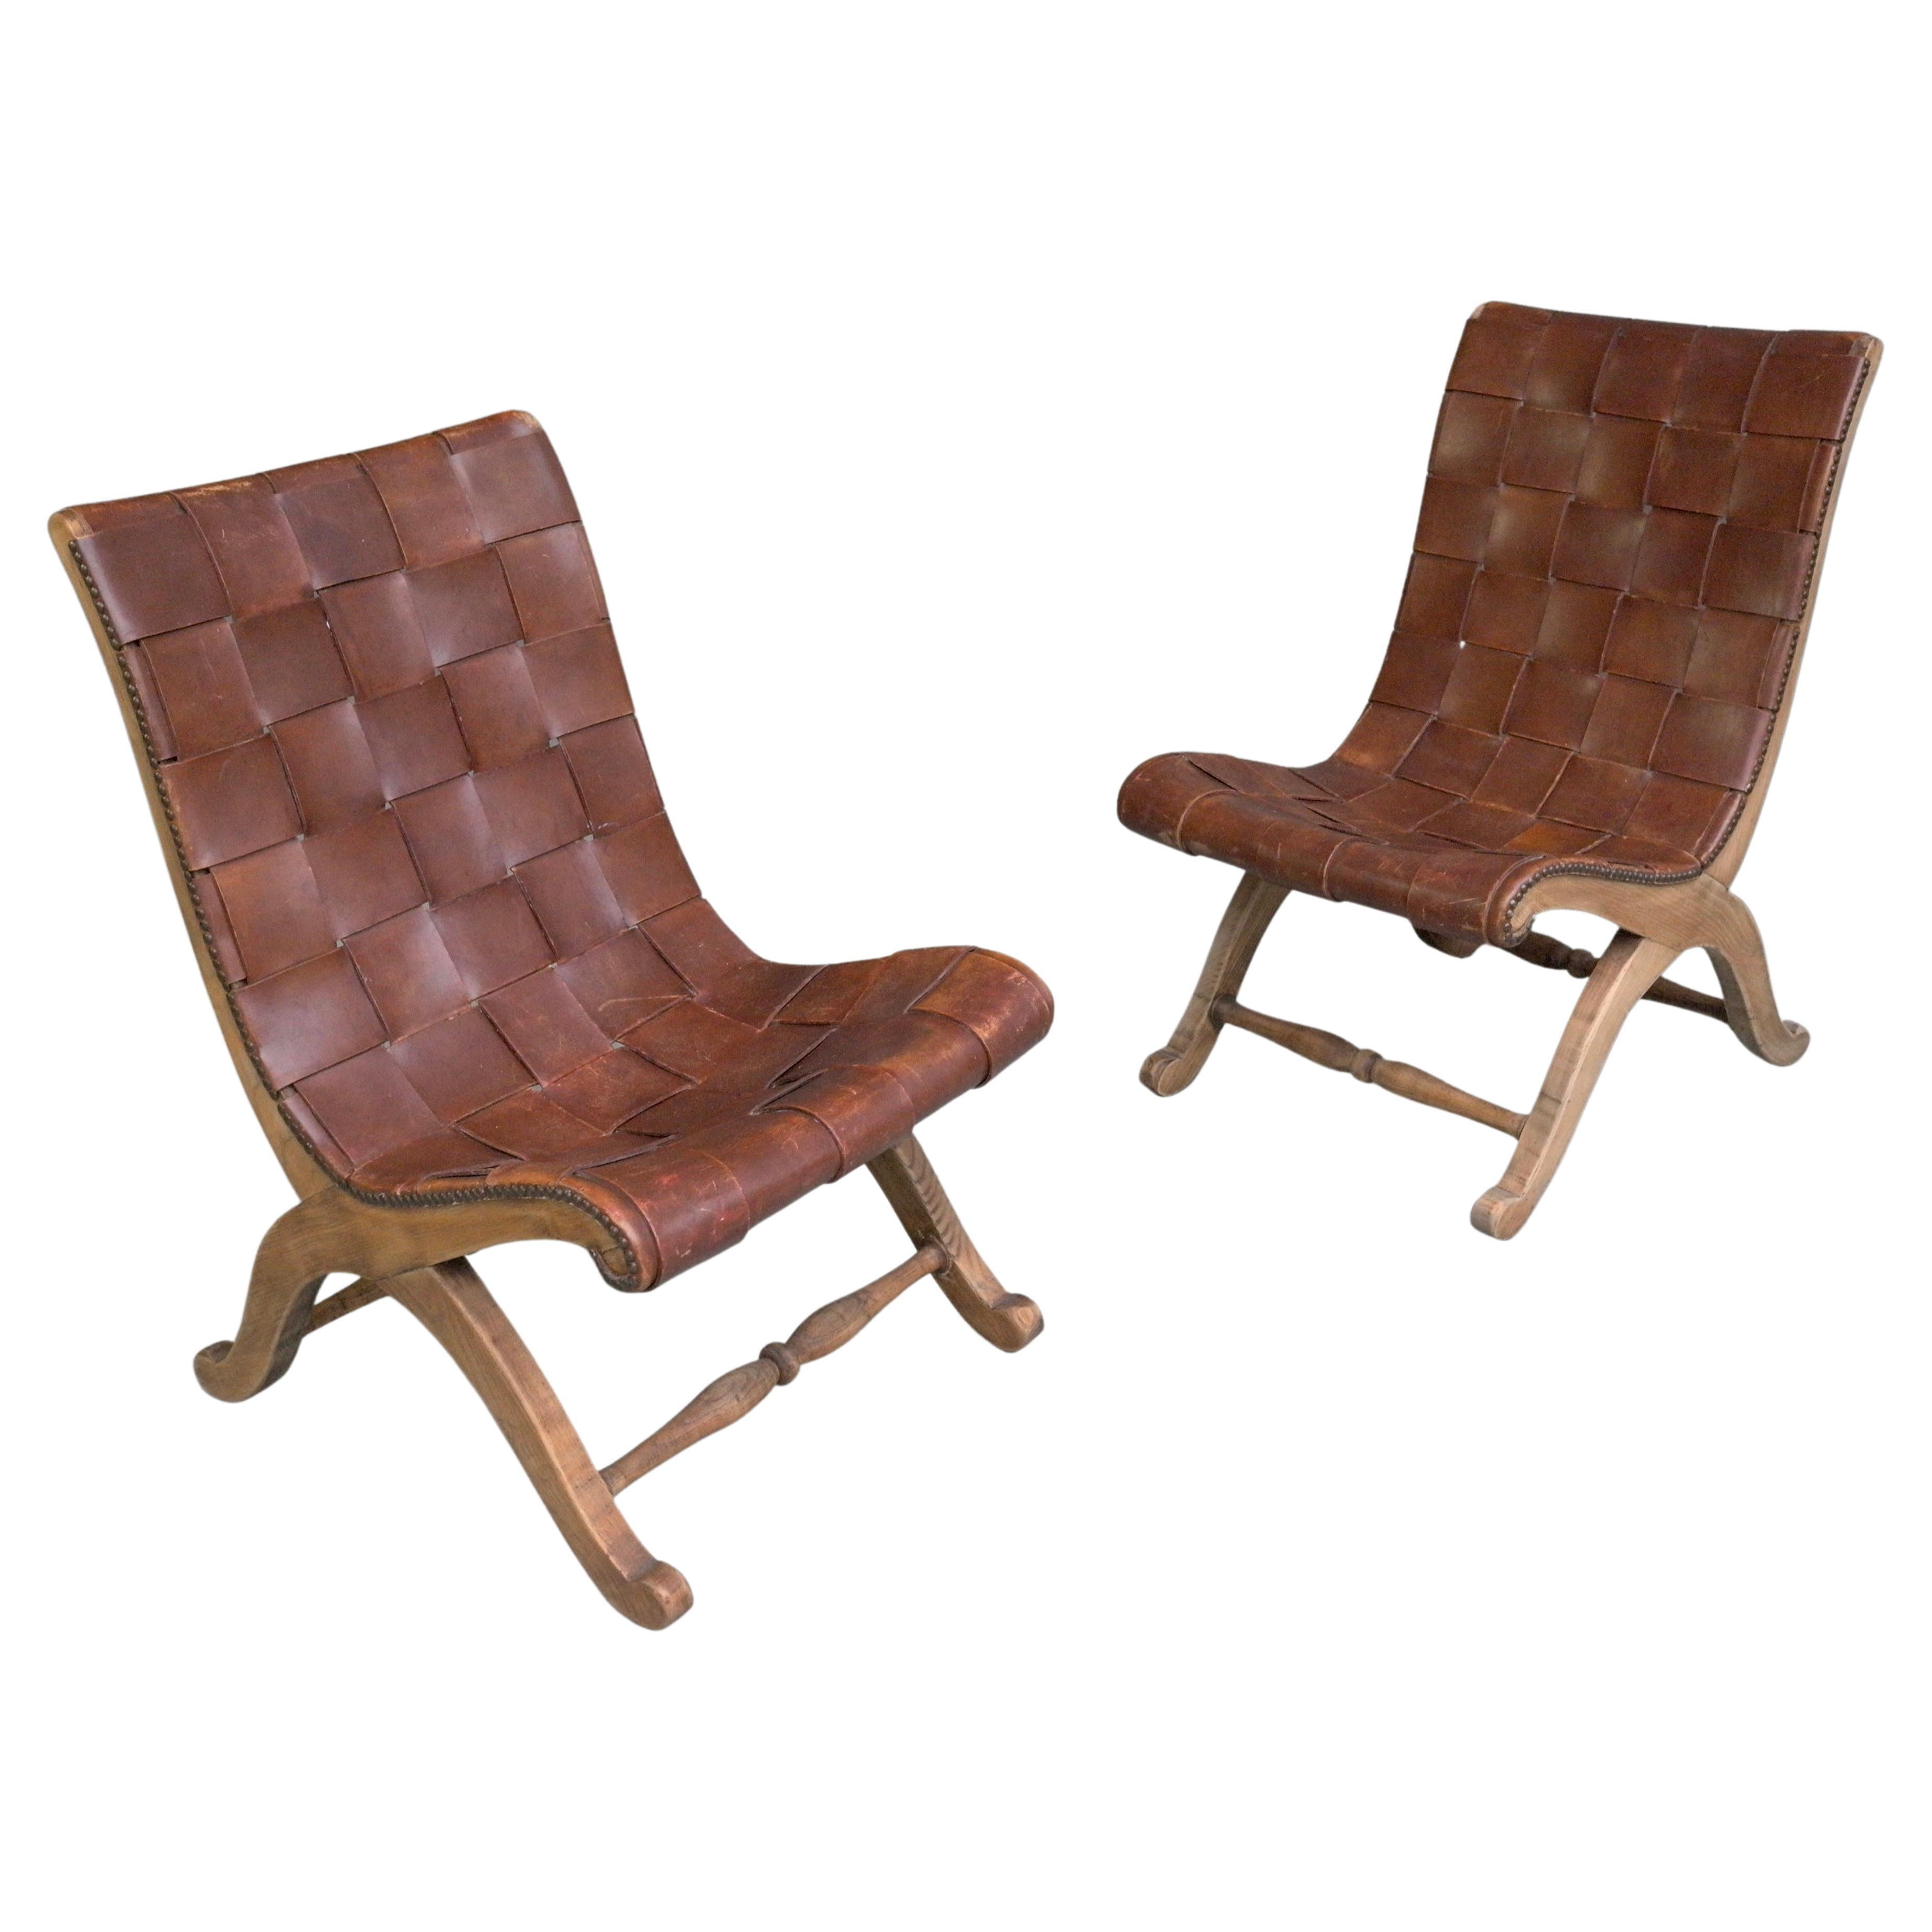 Pair of Valenti Midcentury Cognac Patina Leather Strap Slipper Lounge Chairs